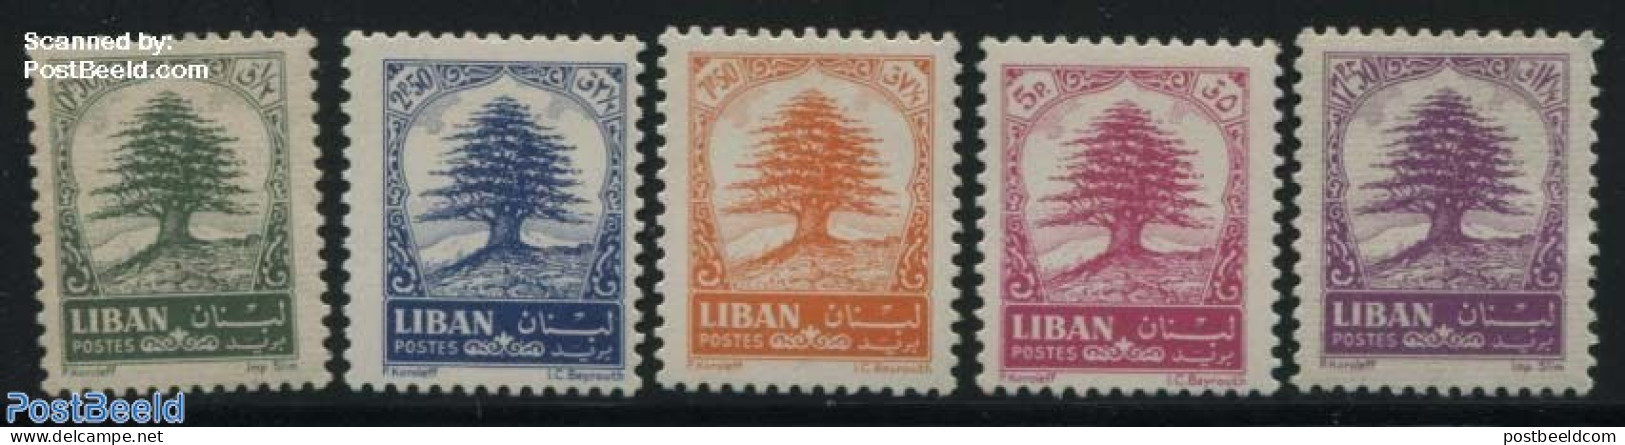 Lebanon 1964 Definitives 5v, Mint NH, Nature - Trees & Forests - Rotary, Lions Club